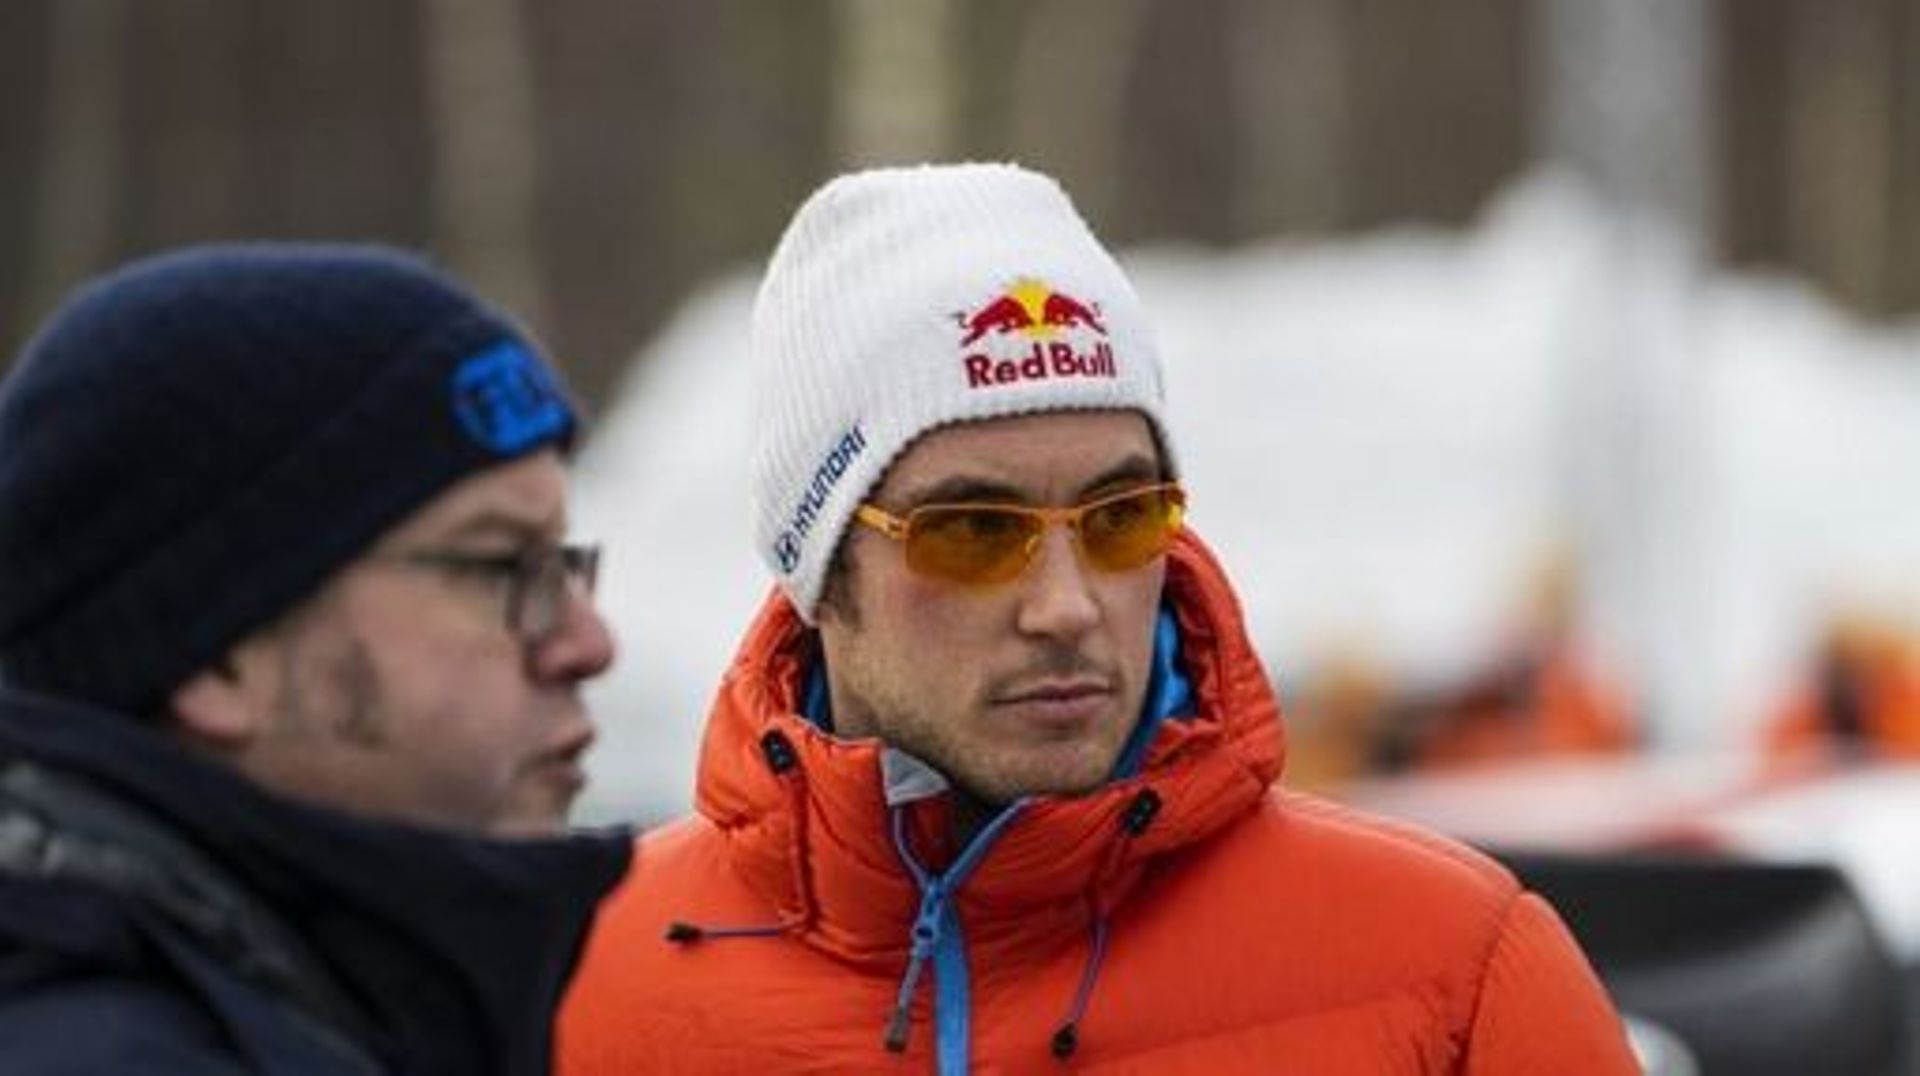 Thierry Neuville of Belgium after the so-called wolf power stage of the Rally Sweden, part of the FIA World Rally Championship, on February 12, 2023 in Umea, Sweden. Jonathan NACKSTRAND / AFP